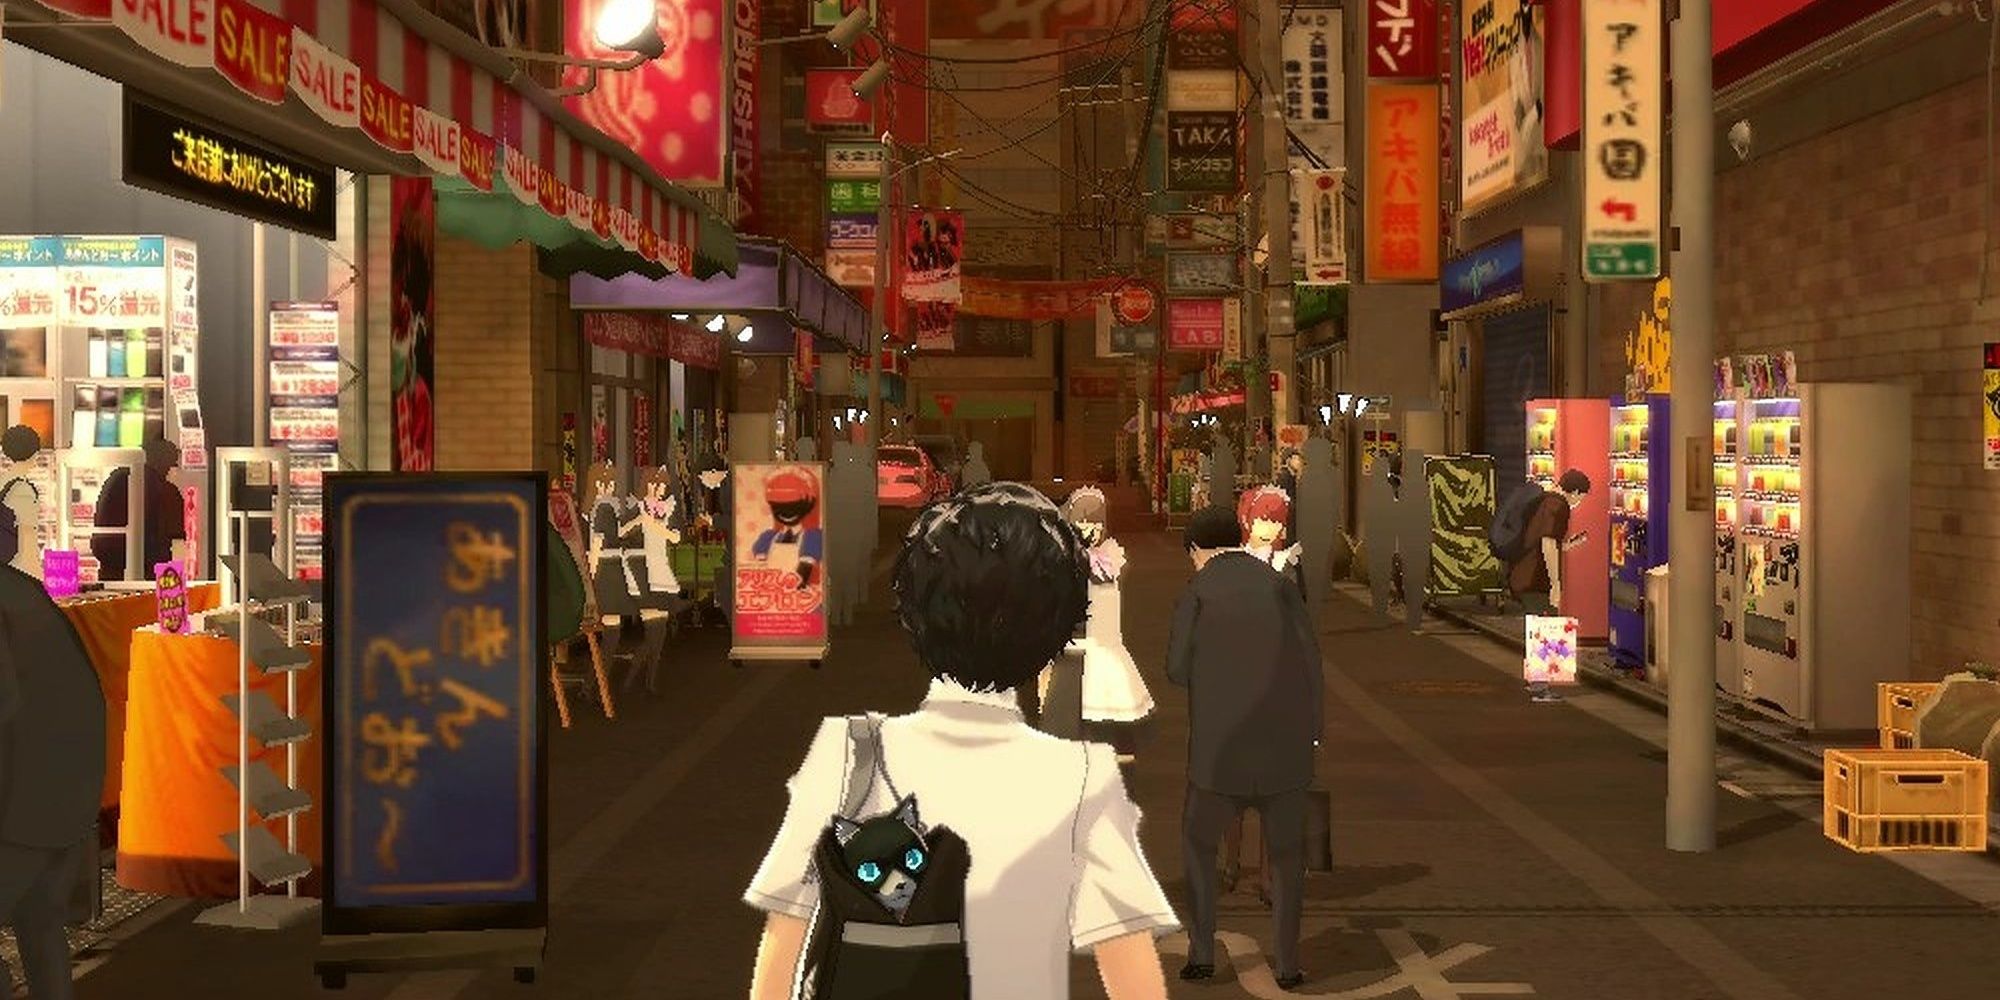 Persona 5 Locations You Can Visit In The Real World